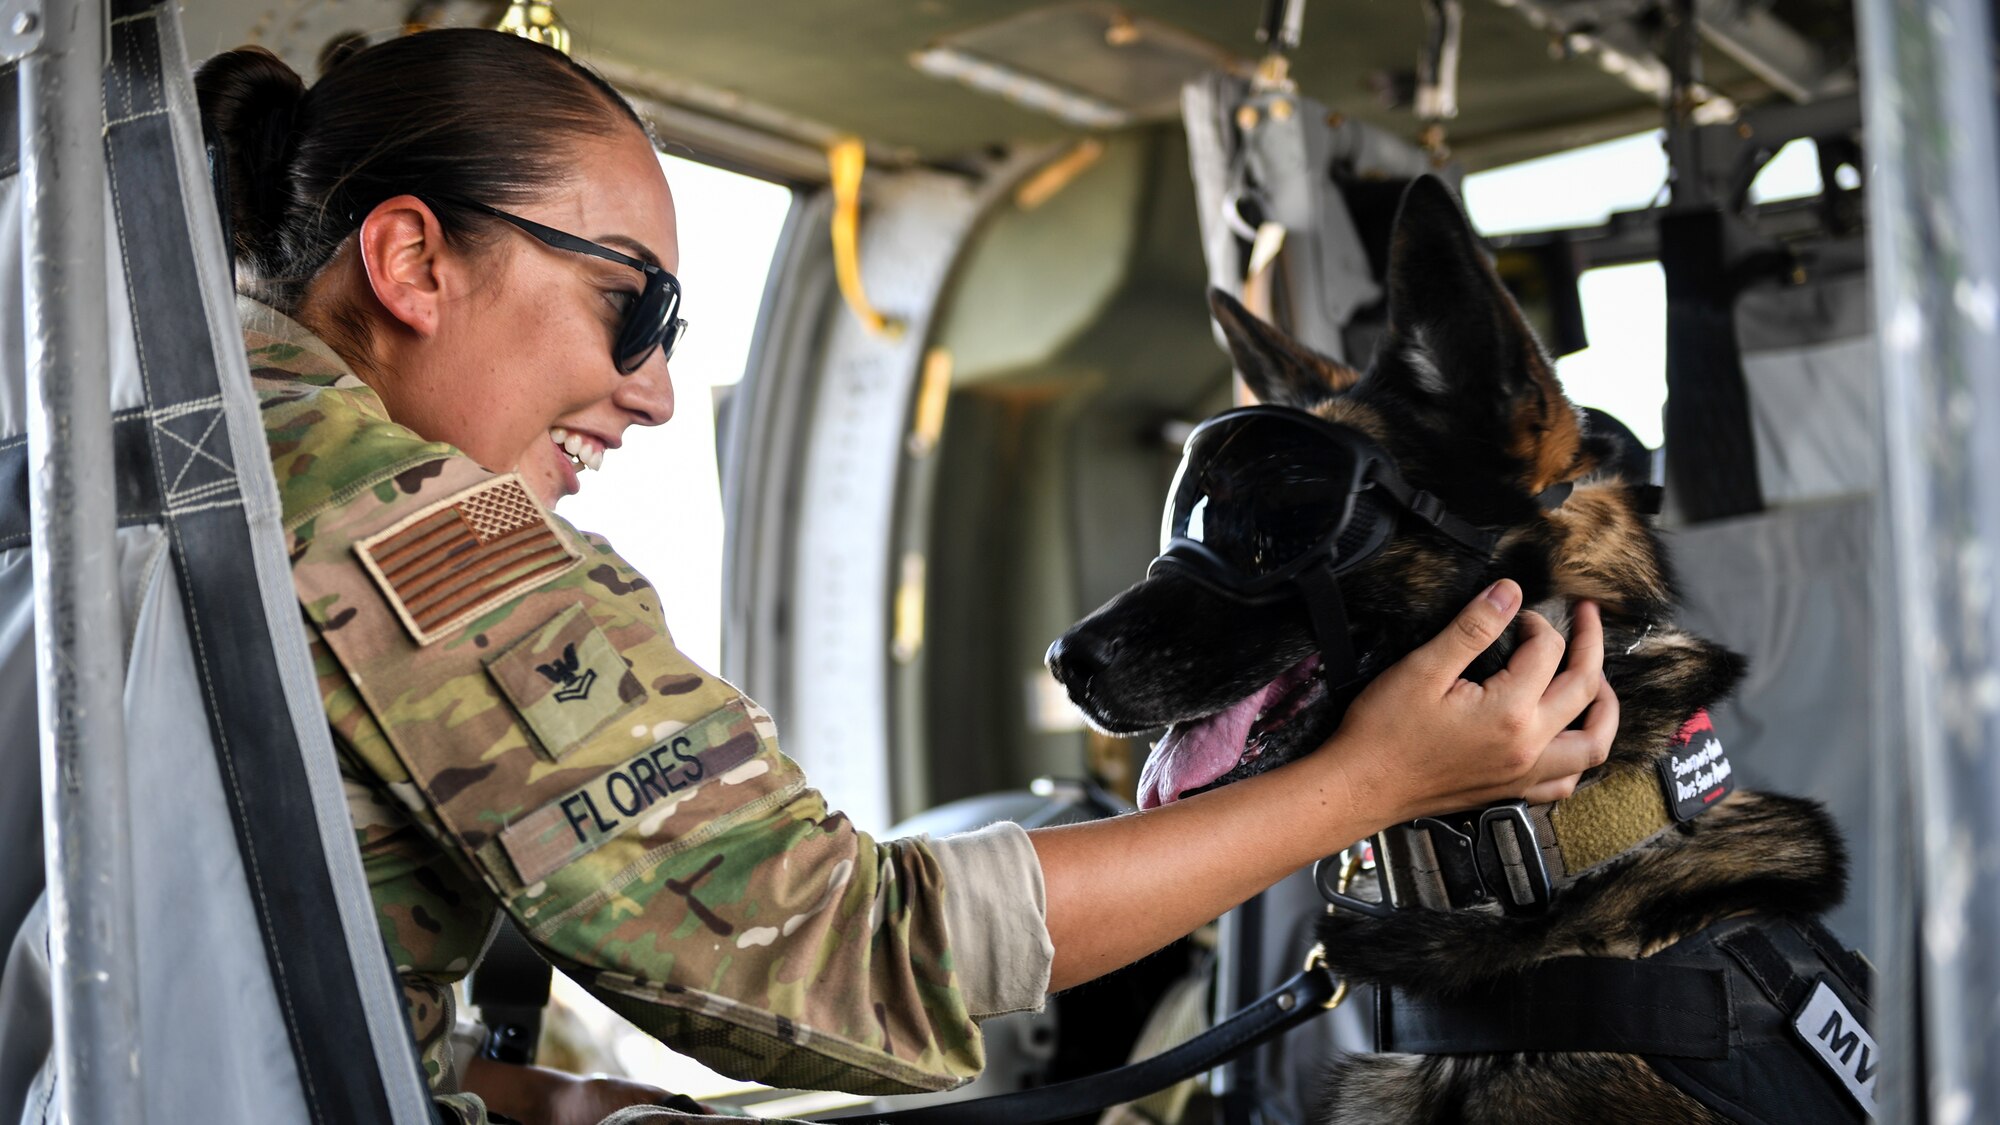 U.S. Navy Master-at-Arms 2nd Class Brianna Flores, Area Support Group Kuwait – Directorate of Emergency Services – K-9 Unit military working dog handler, comforts her military working dog after boarding a UH-60 Black Hawk helicopter at Ali Al Salem Air Base, Kuwait, Sept. 13, 2019. As part of the exercise, U.S. Army veterinary doctors worked with emergency medical responders sharing life-saving measures for MWDs in case of extreme emergencies where veterinary technicians might not be immediately available. (U.S. Air Force photo by Staff Sgt. Mozer O. Da Cunha)